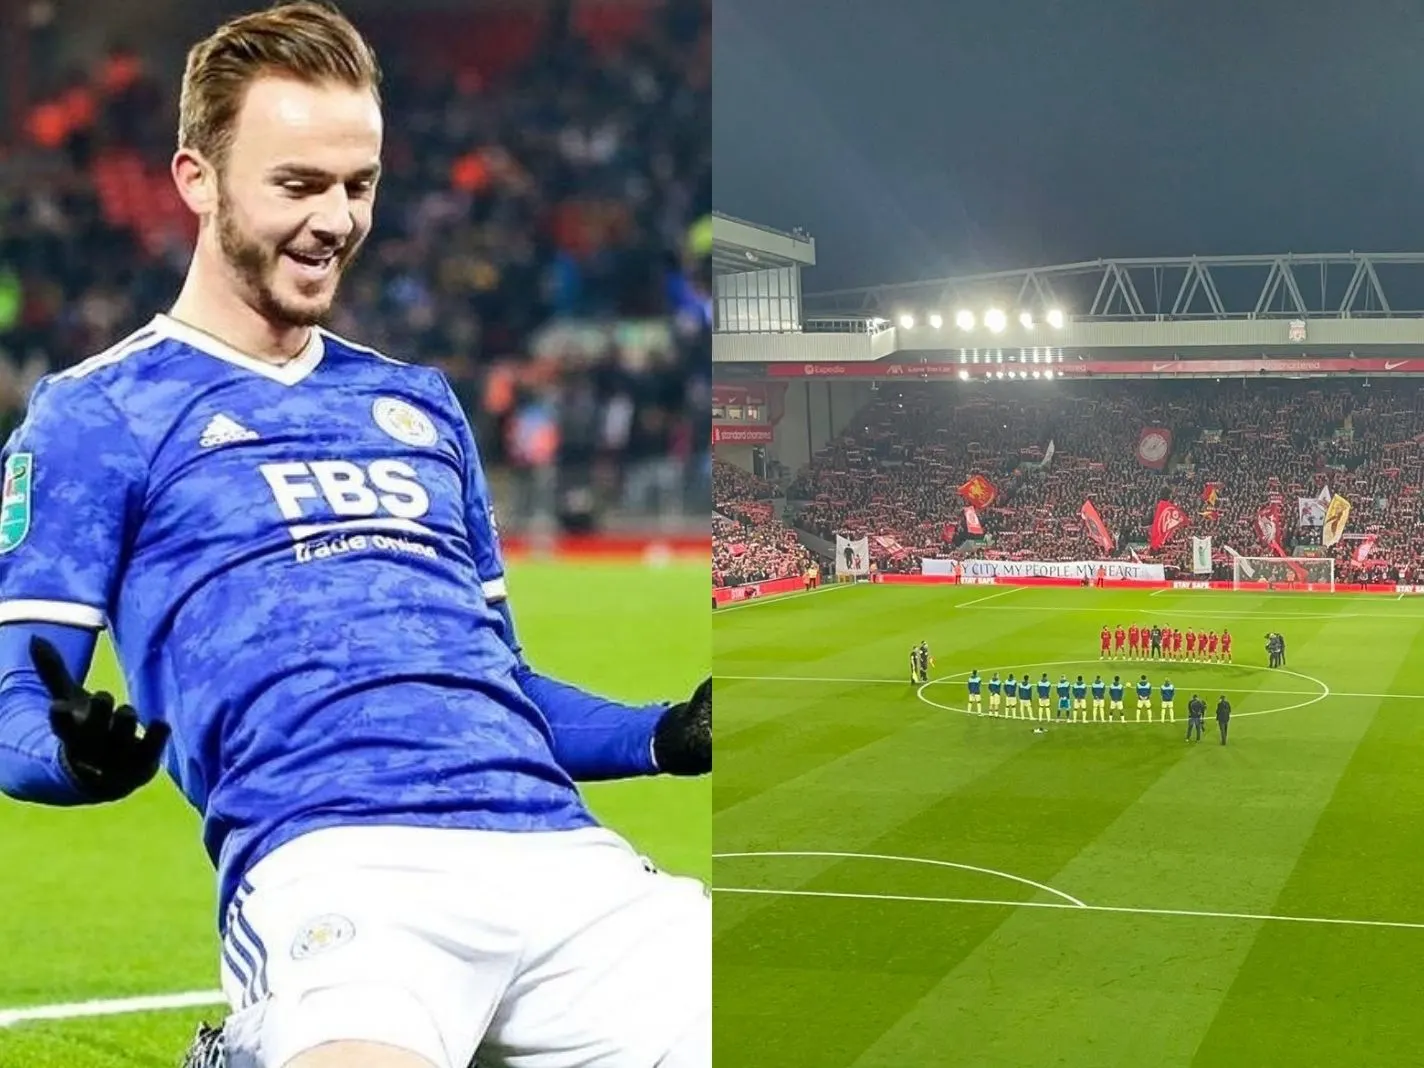 James Maddison celebrates his goal as prem-match photo shows Liverpool and Leicester players before Carabao Cup clash at Anfield